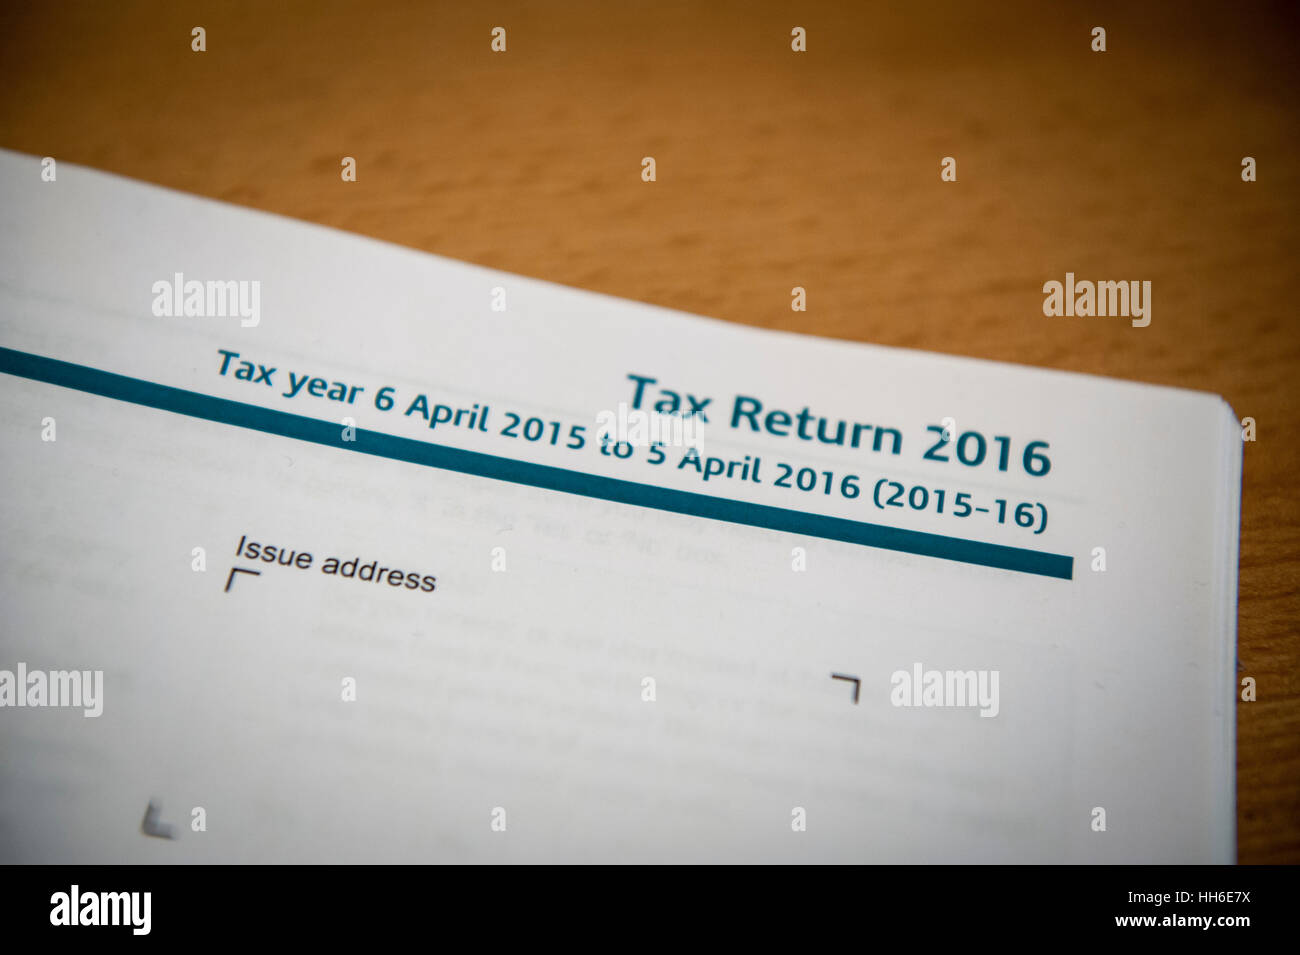 Self assessment for self employed people and sole traders, tax return 2016 Stock Photo